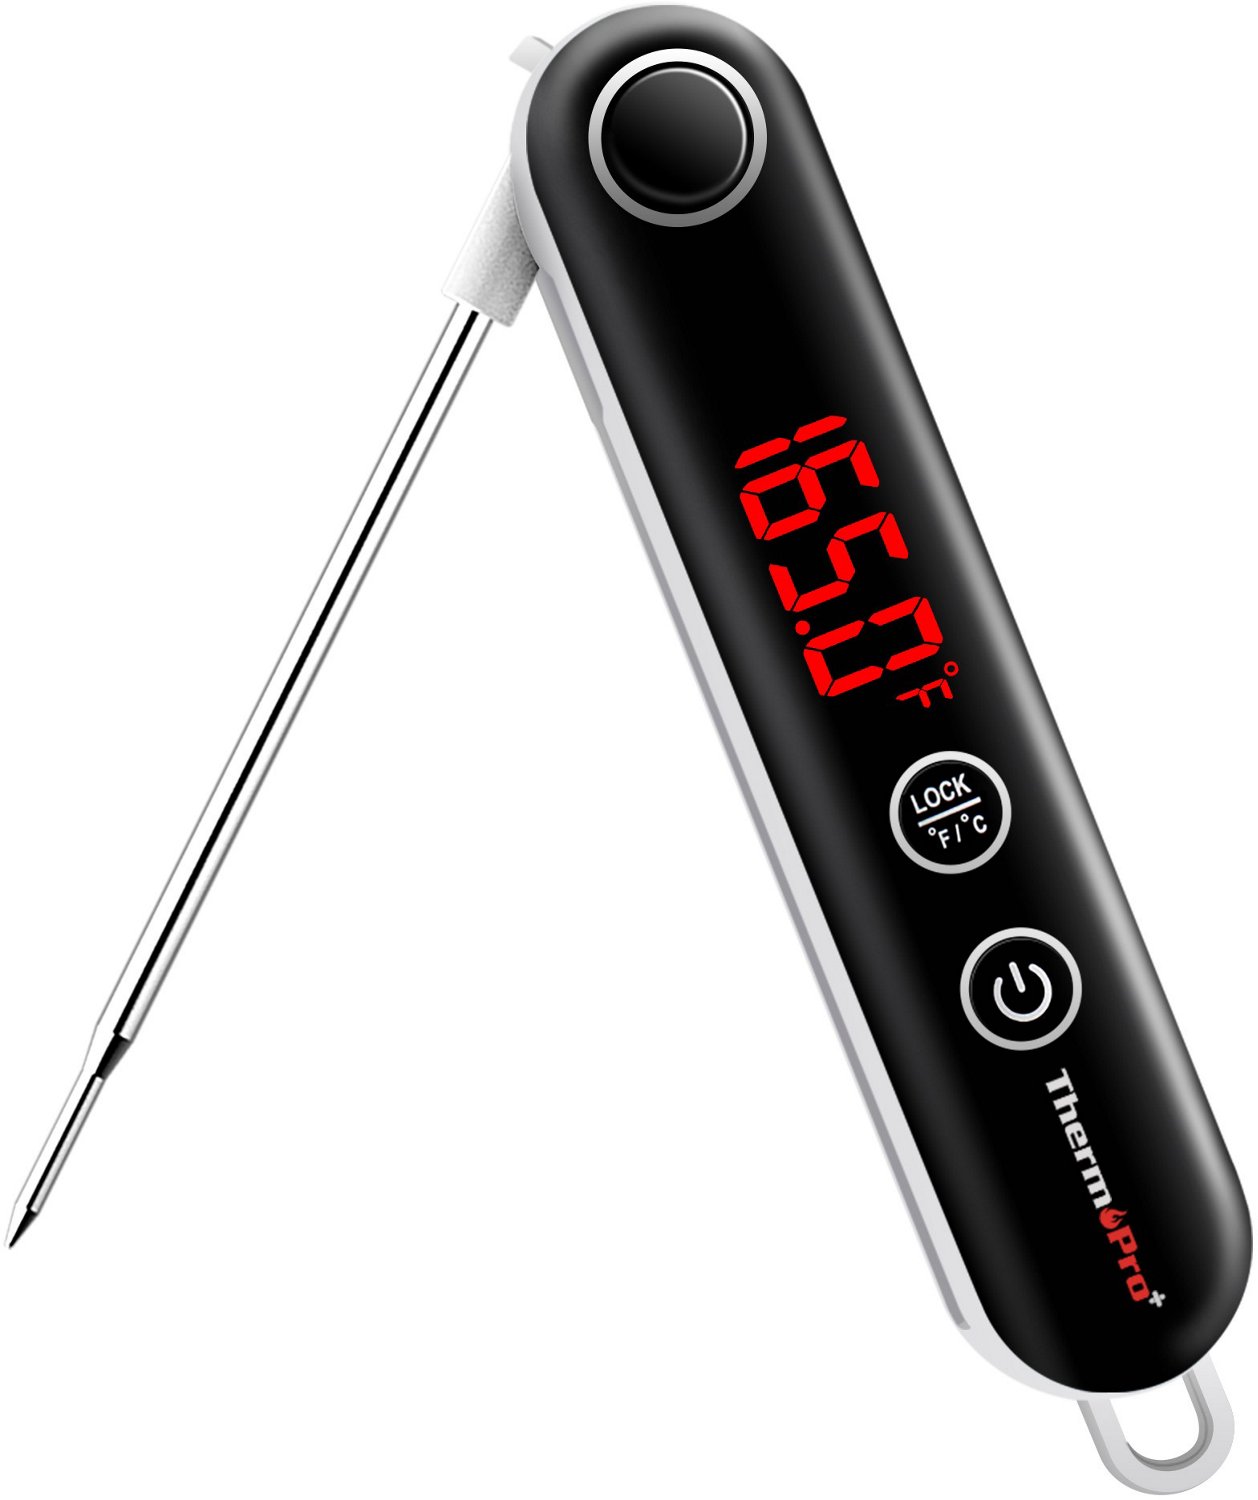  ThermoPro TP03 Digital Meat Thermometer + ThermoPro